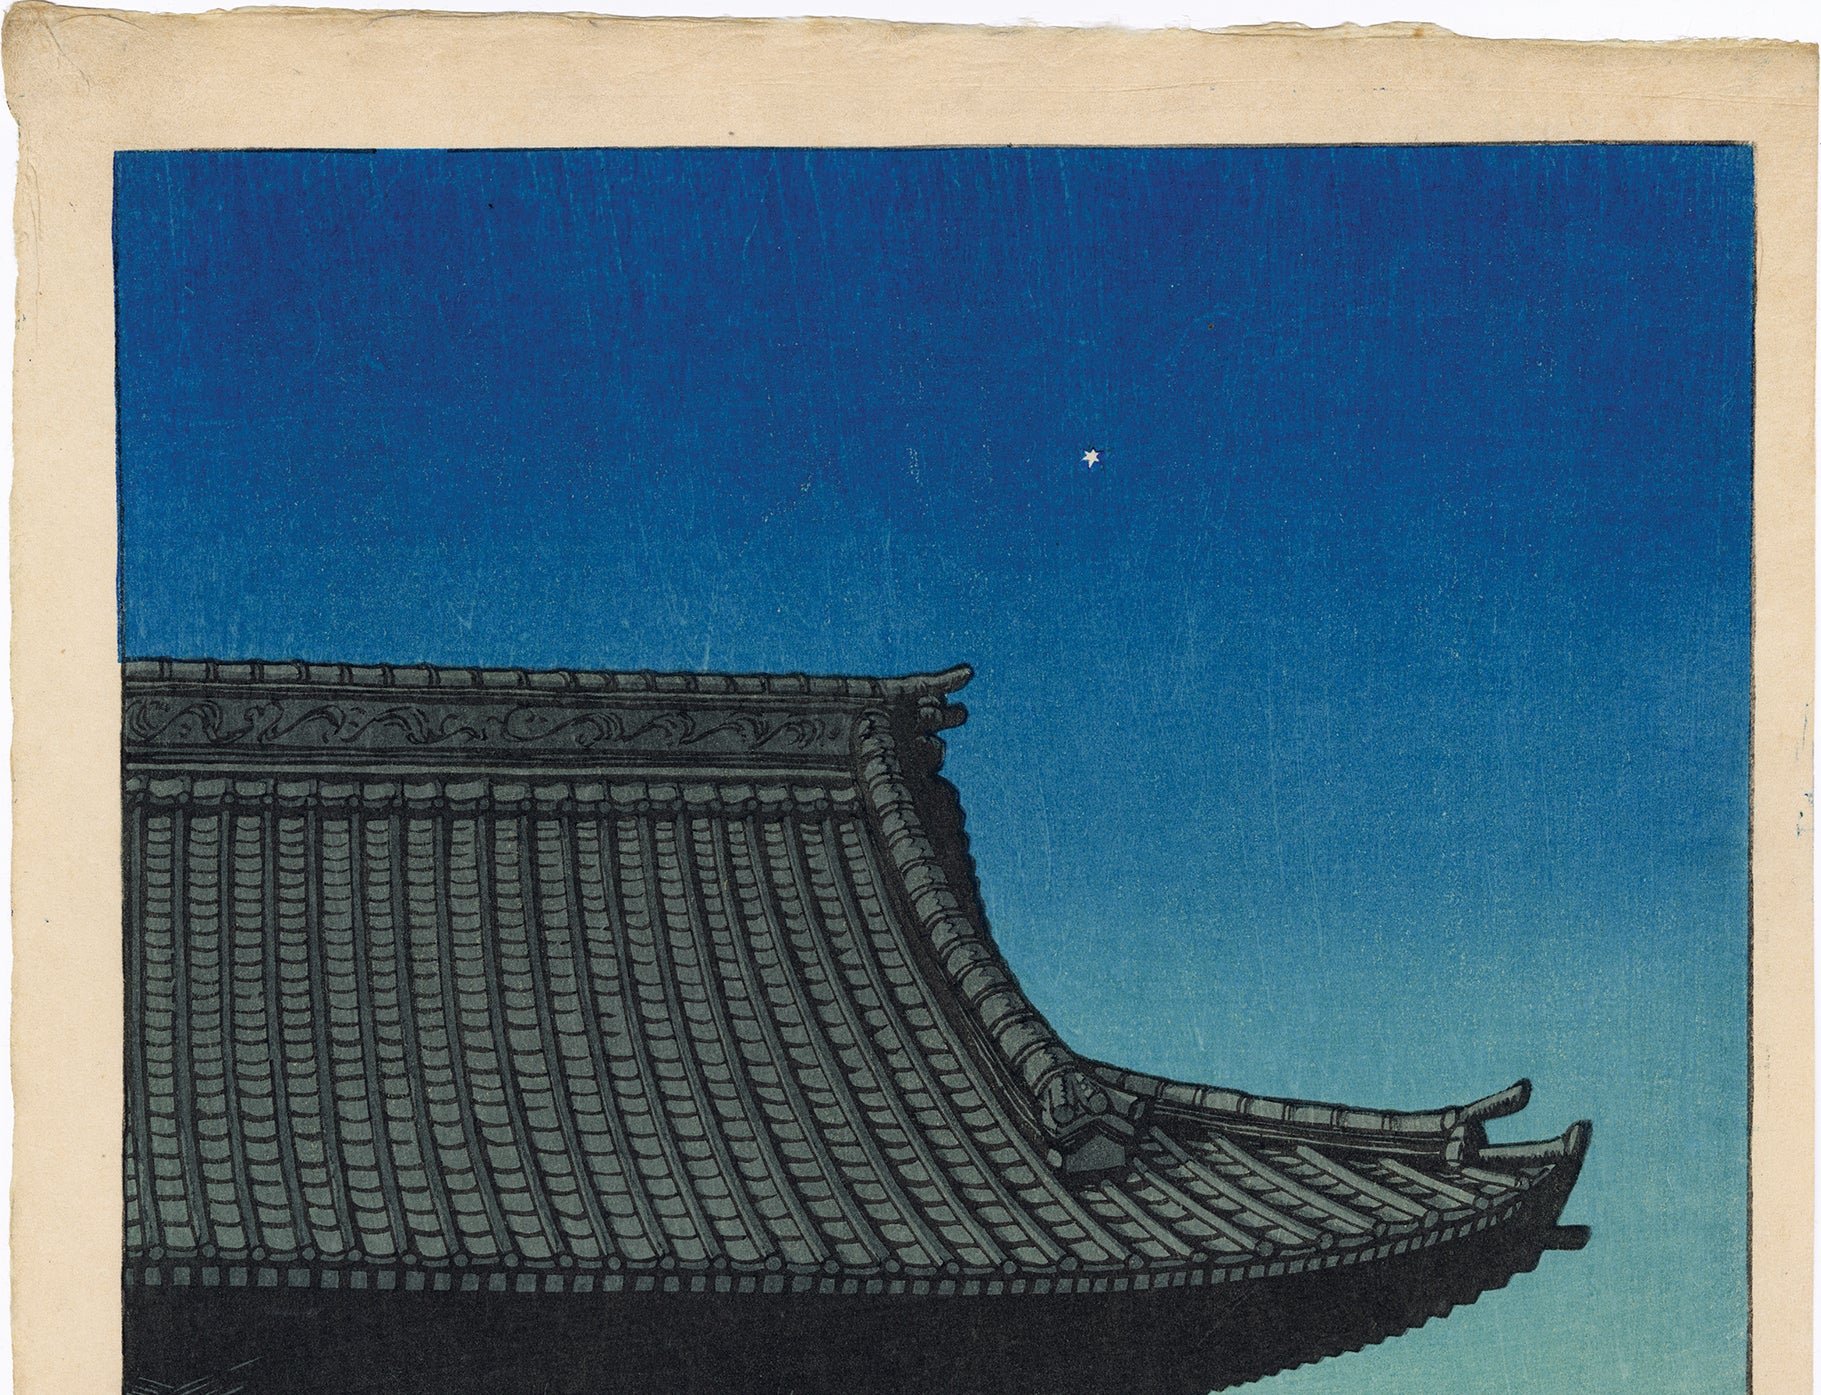 Hasui 巴水: Magical evening view of “Kozu